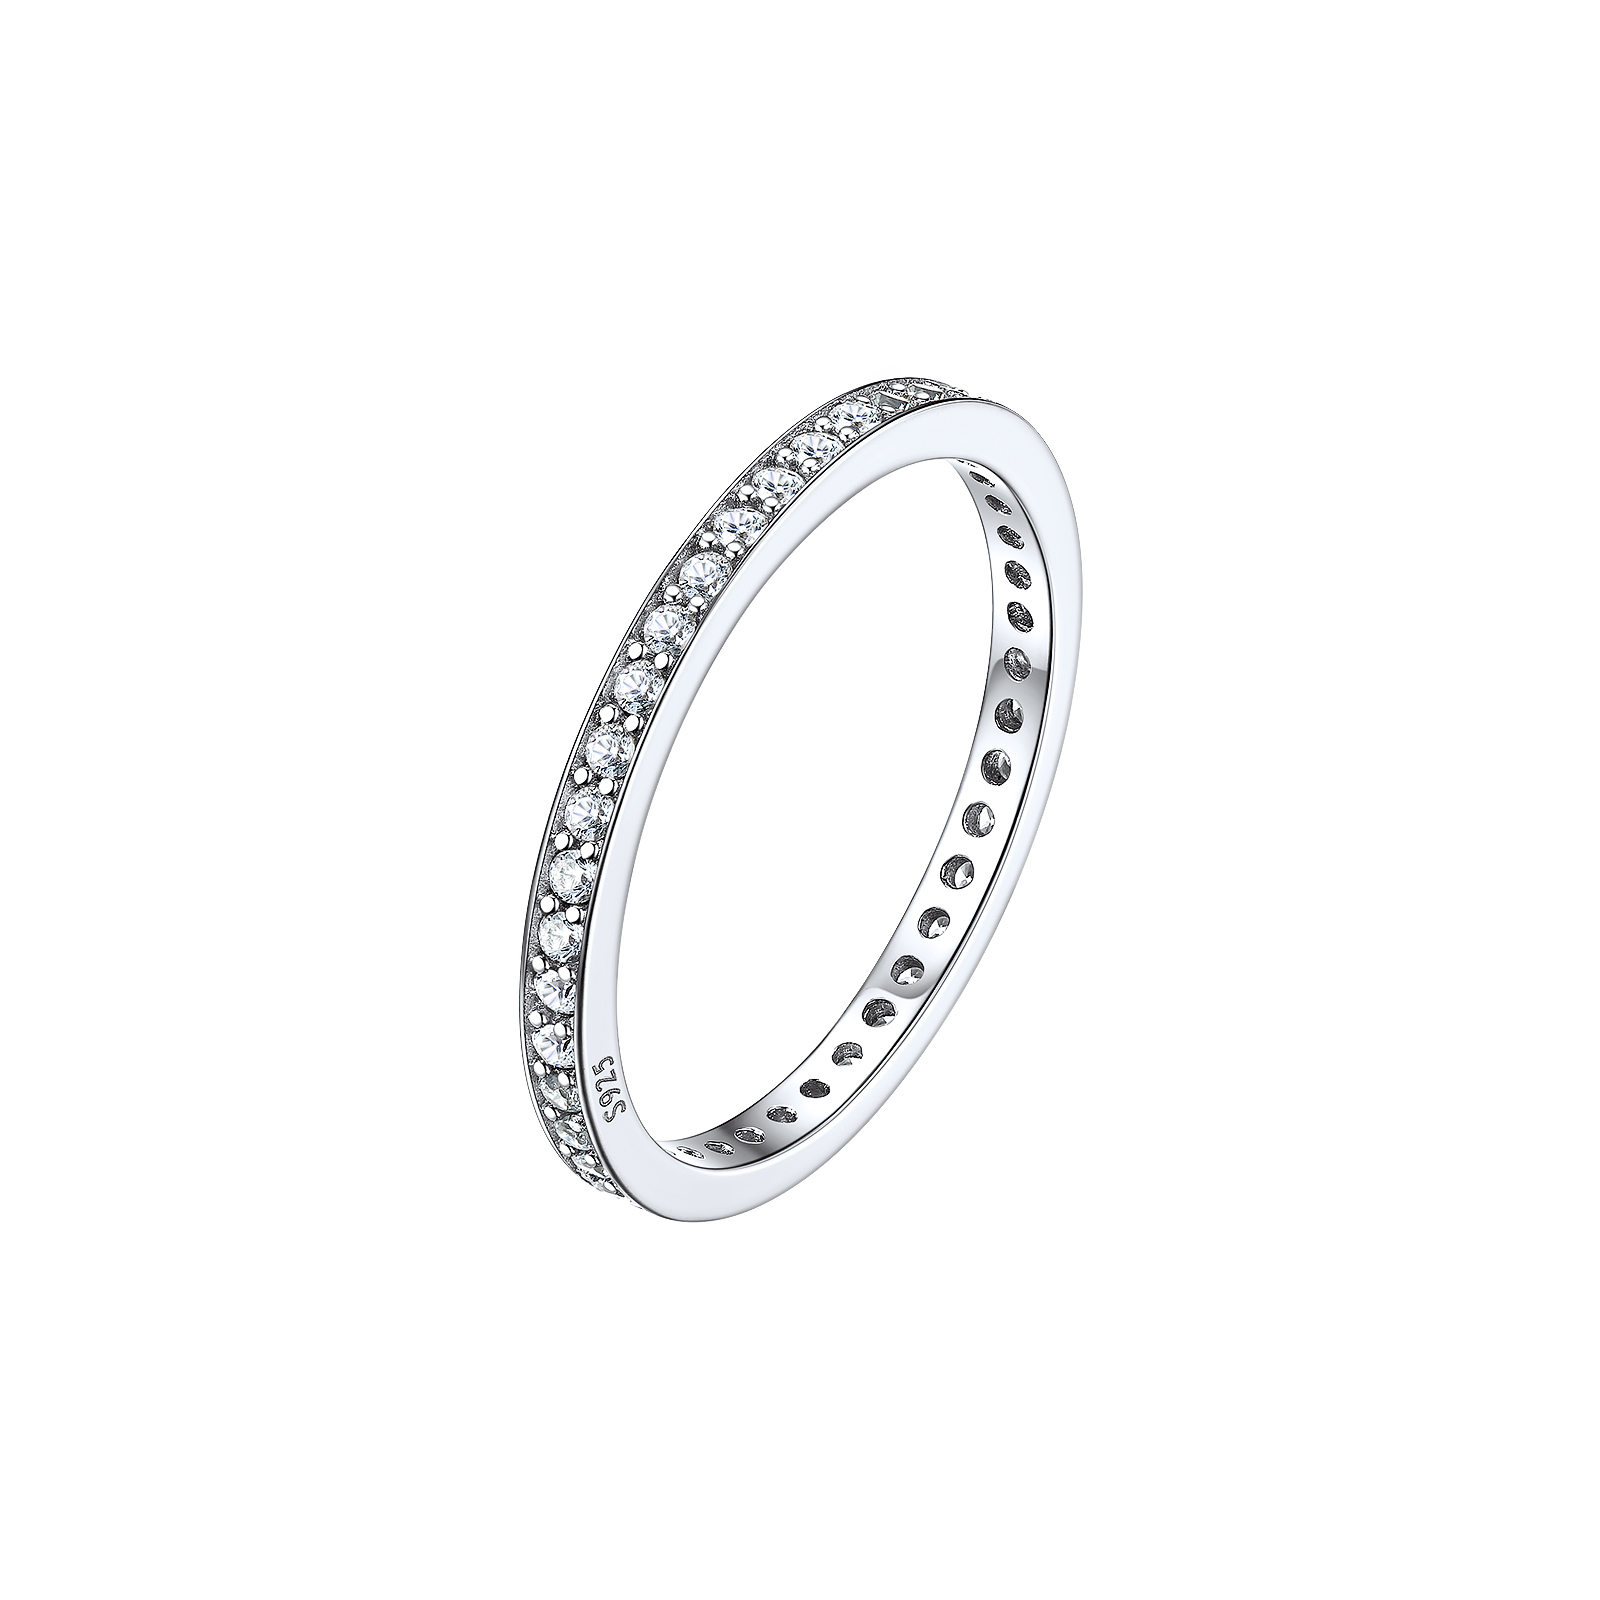 ChicSilver Cubic Zirconia Stackable Ring Eternity Wedding Band Ring